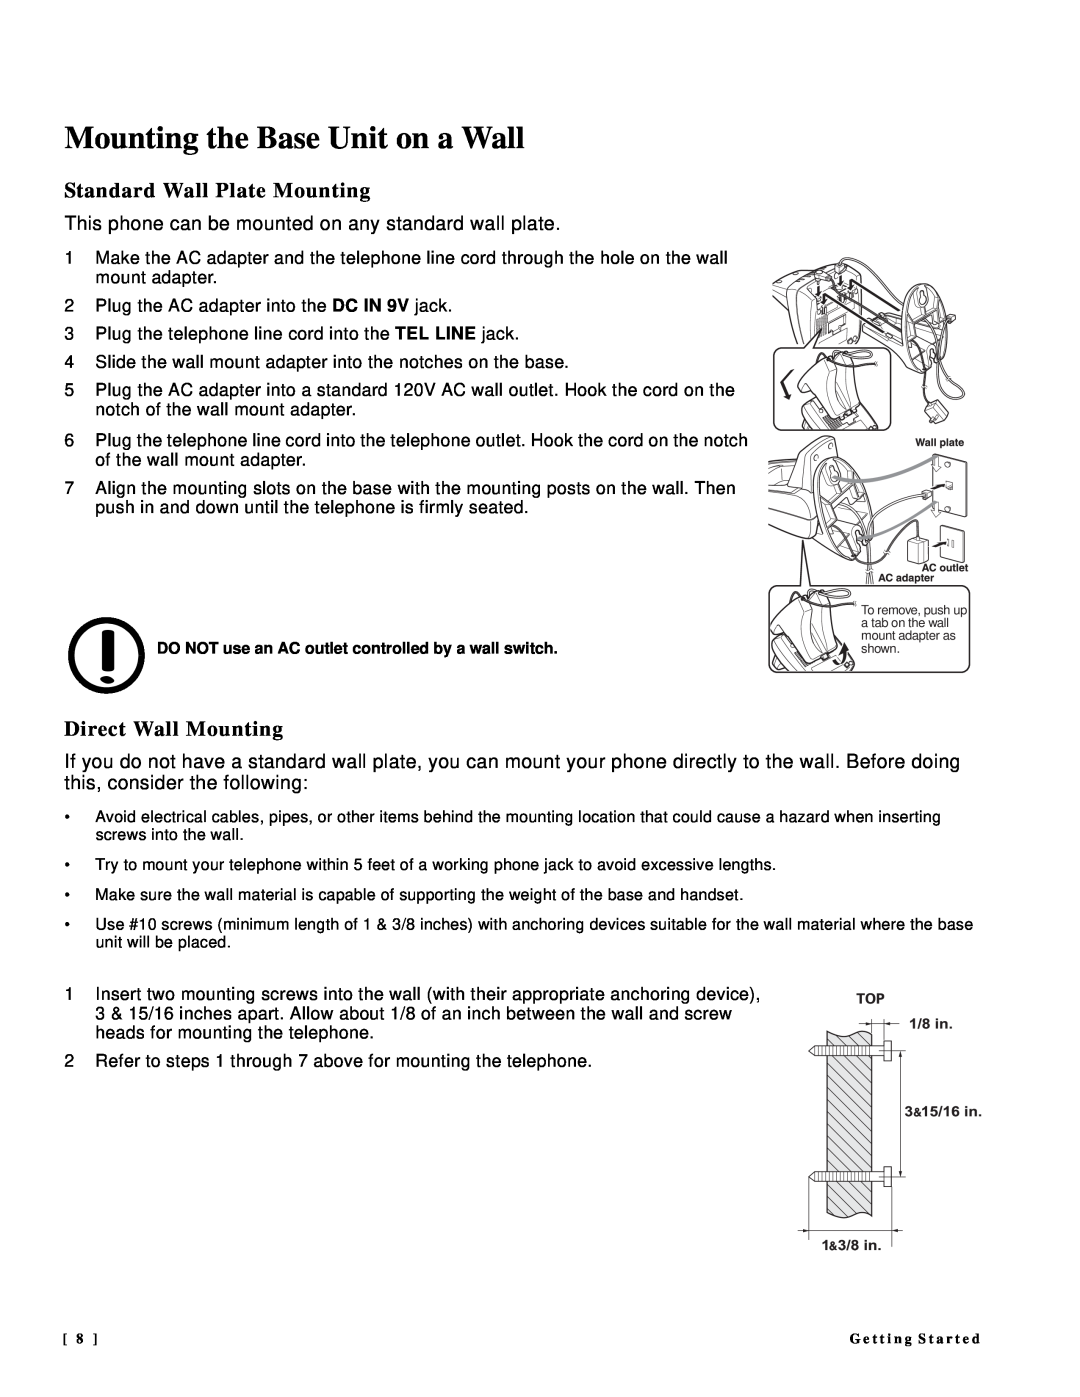 NEC DTR-IR-2 user manual Mounting the Base Unit on a Wall, Standard Wall Plate Mounting, Direct Wall Mounting 